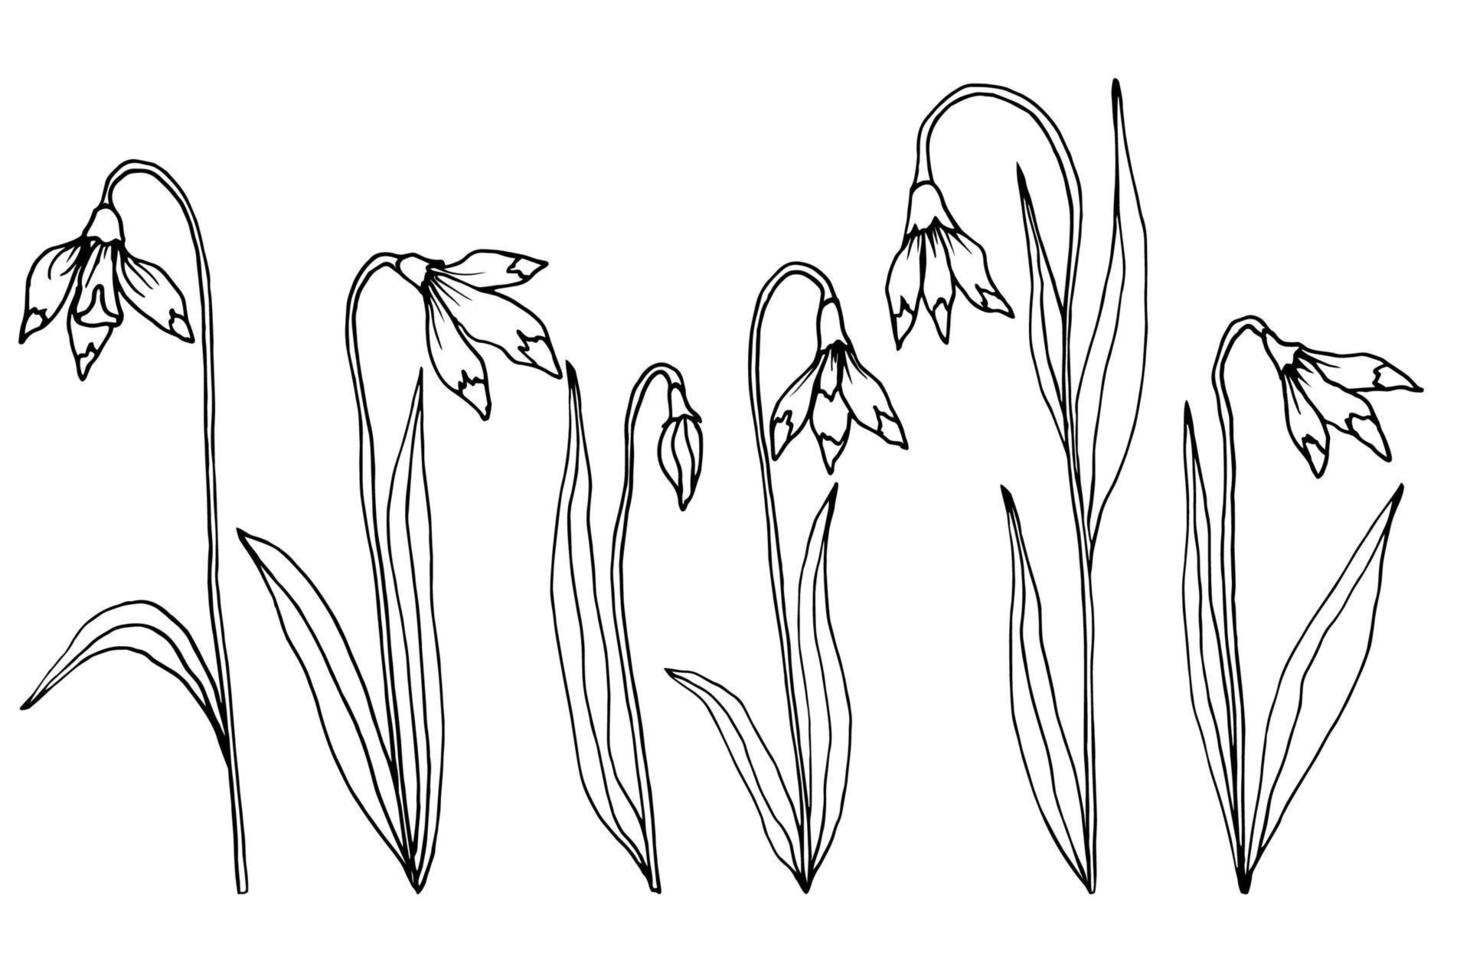 Hand drawn sketch style snowdrops set. Flowers and leaves. Vector illustration.